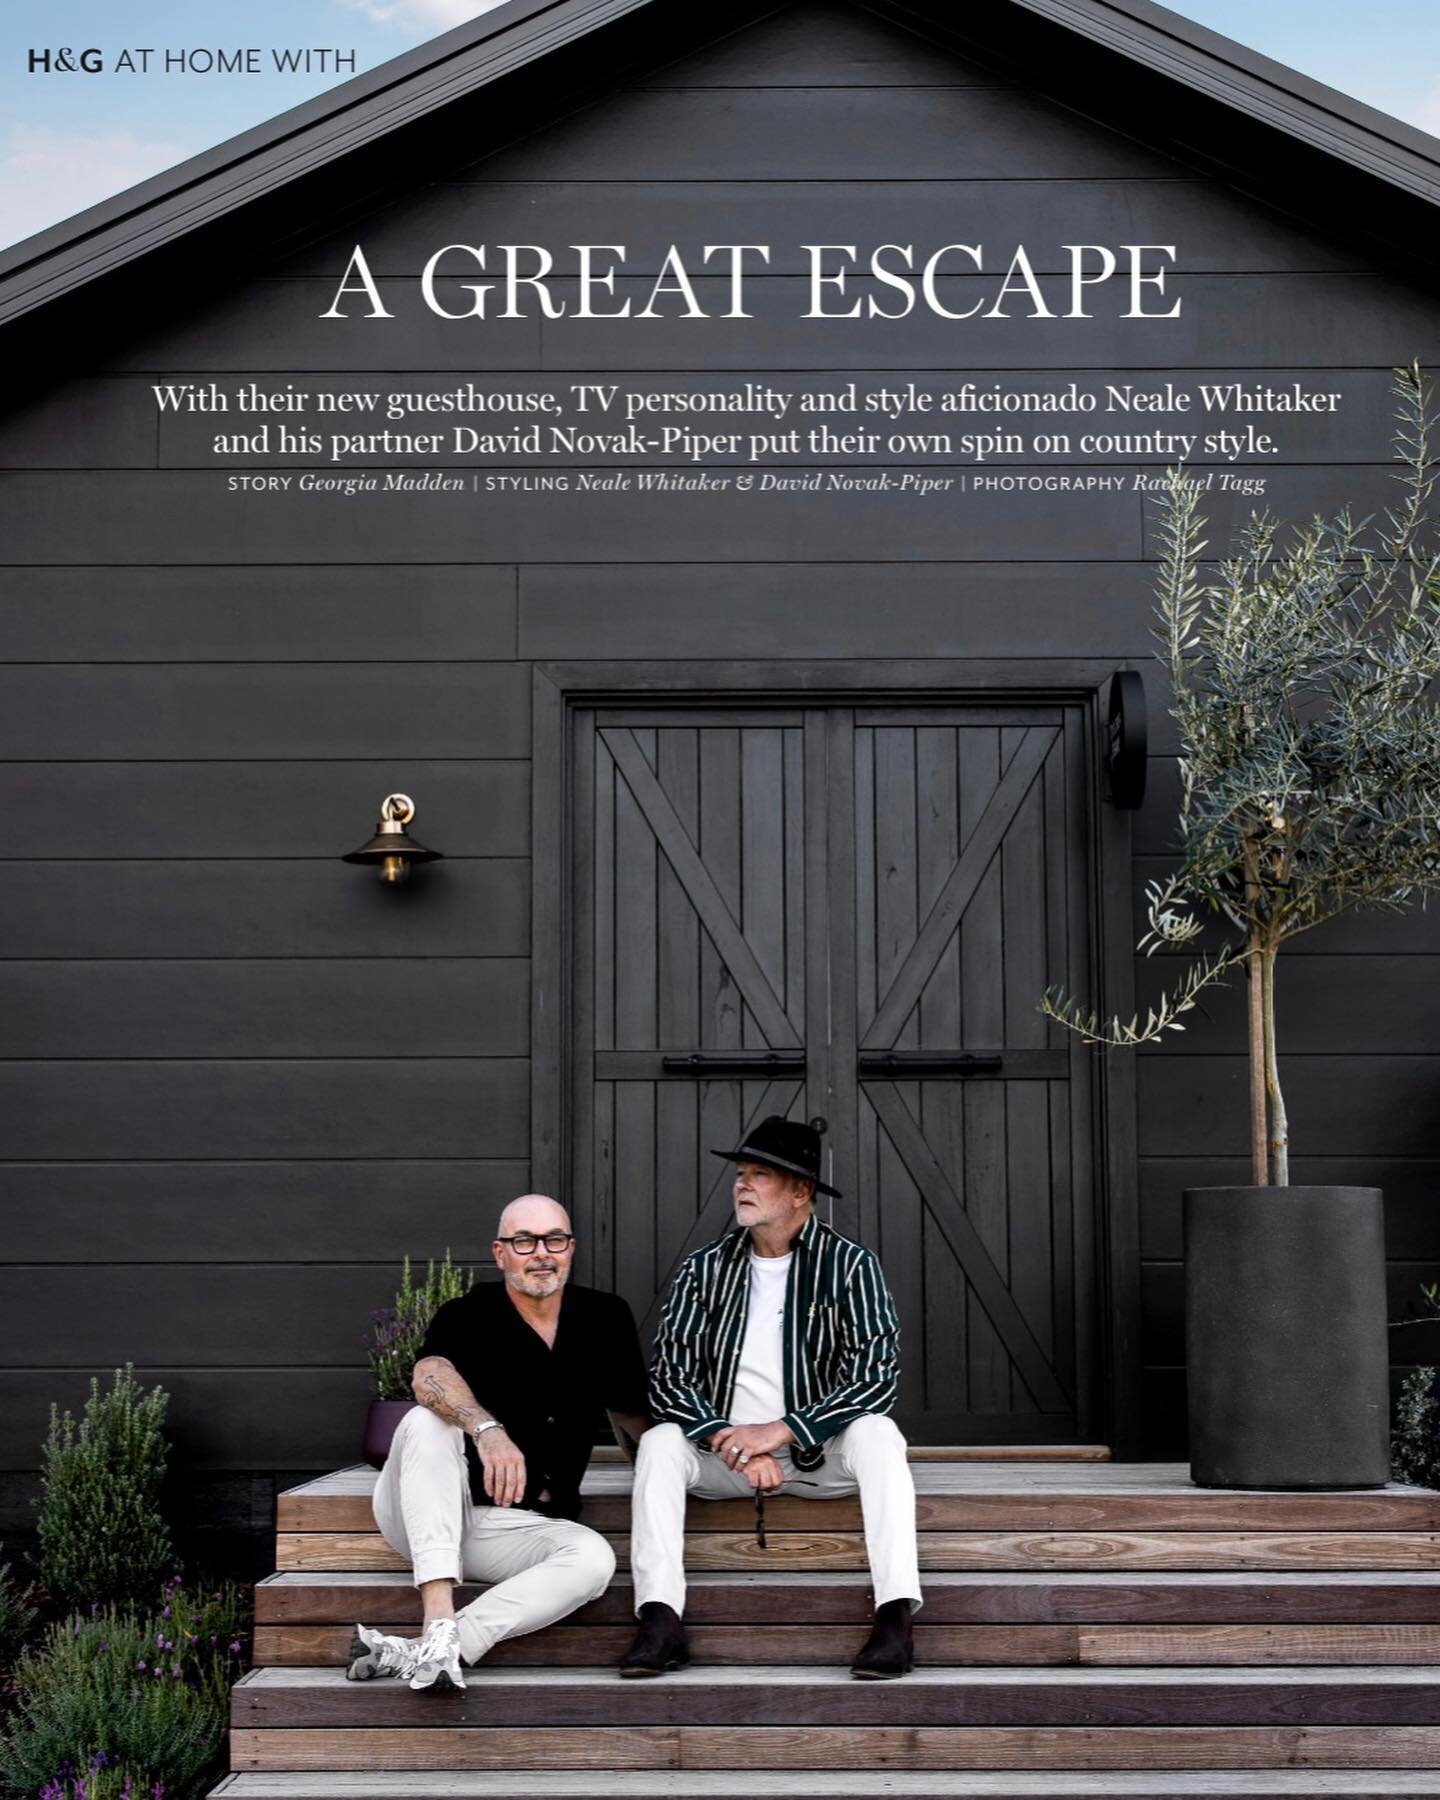 In the January issue of @houseandgarden (out now) features the beautiful new guesthouse of @nealewhitaker and @davidnovakpiper. It is also the first issue of a magazine I&rsquo;ve been officially published in 🙌🏼

Such a privilege to be a part of th